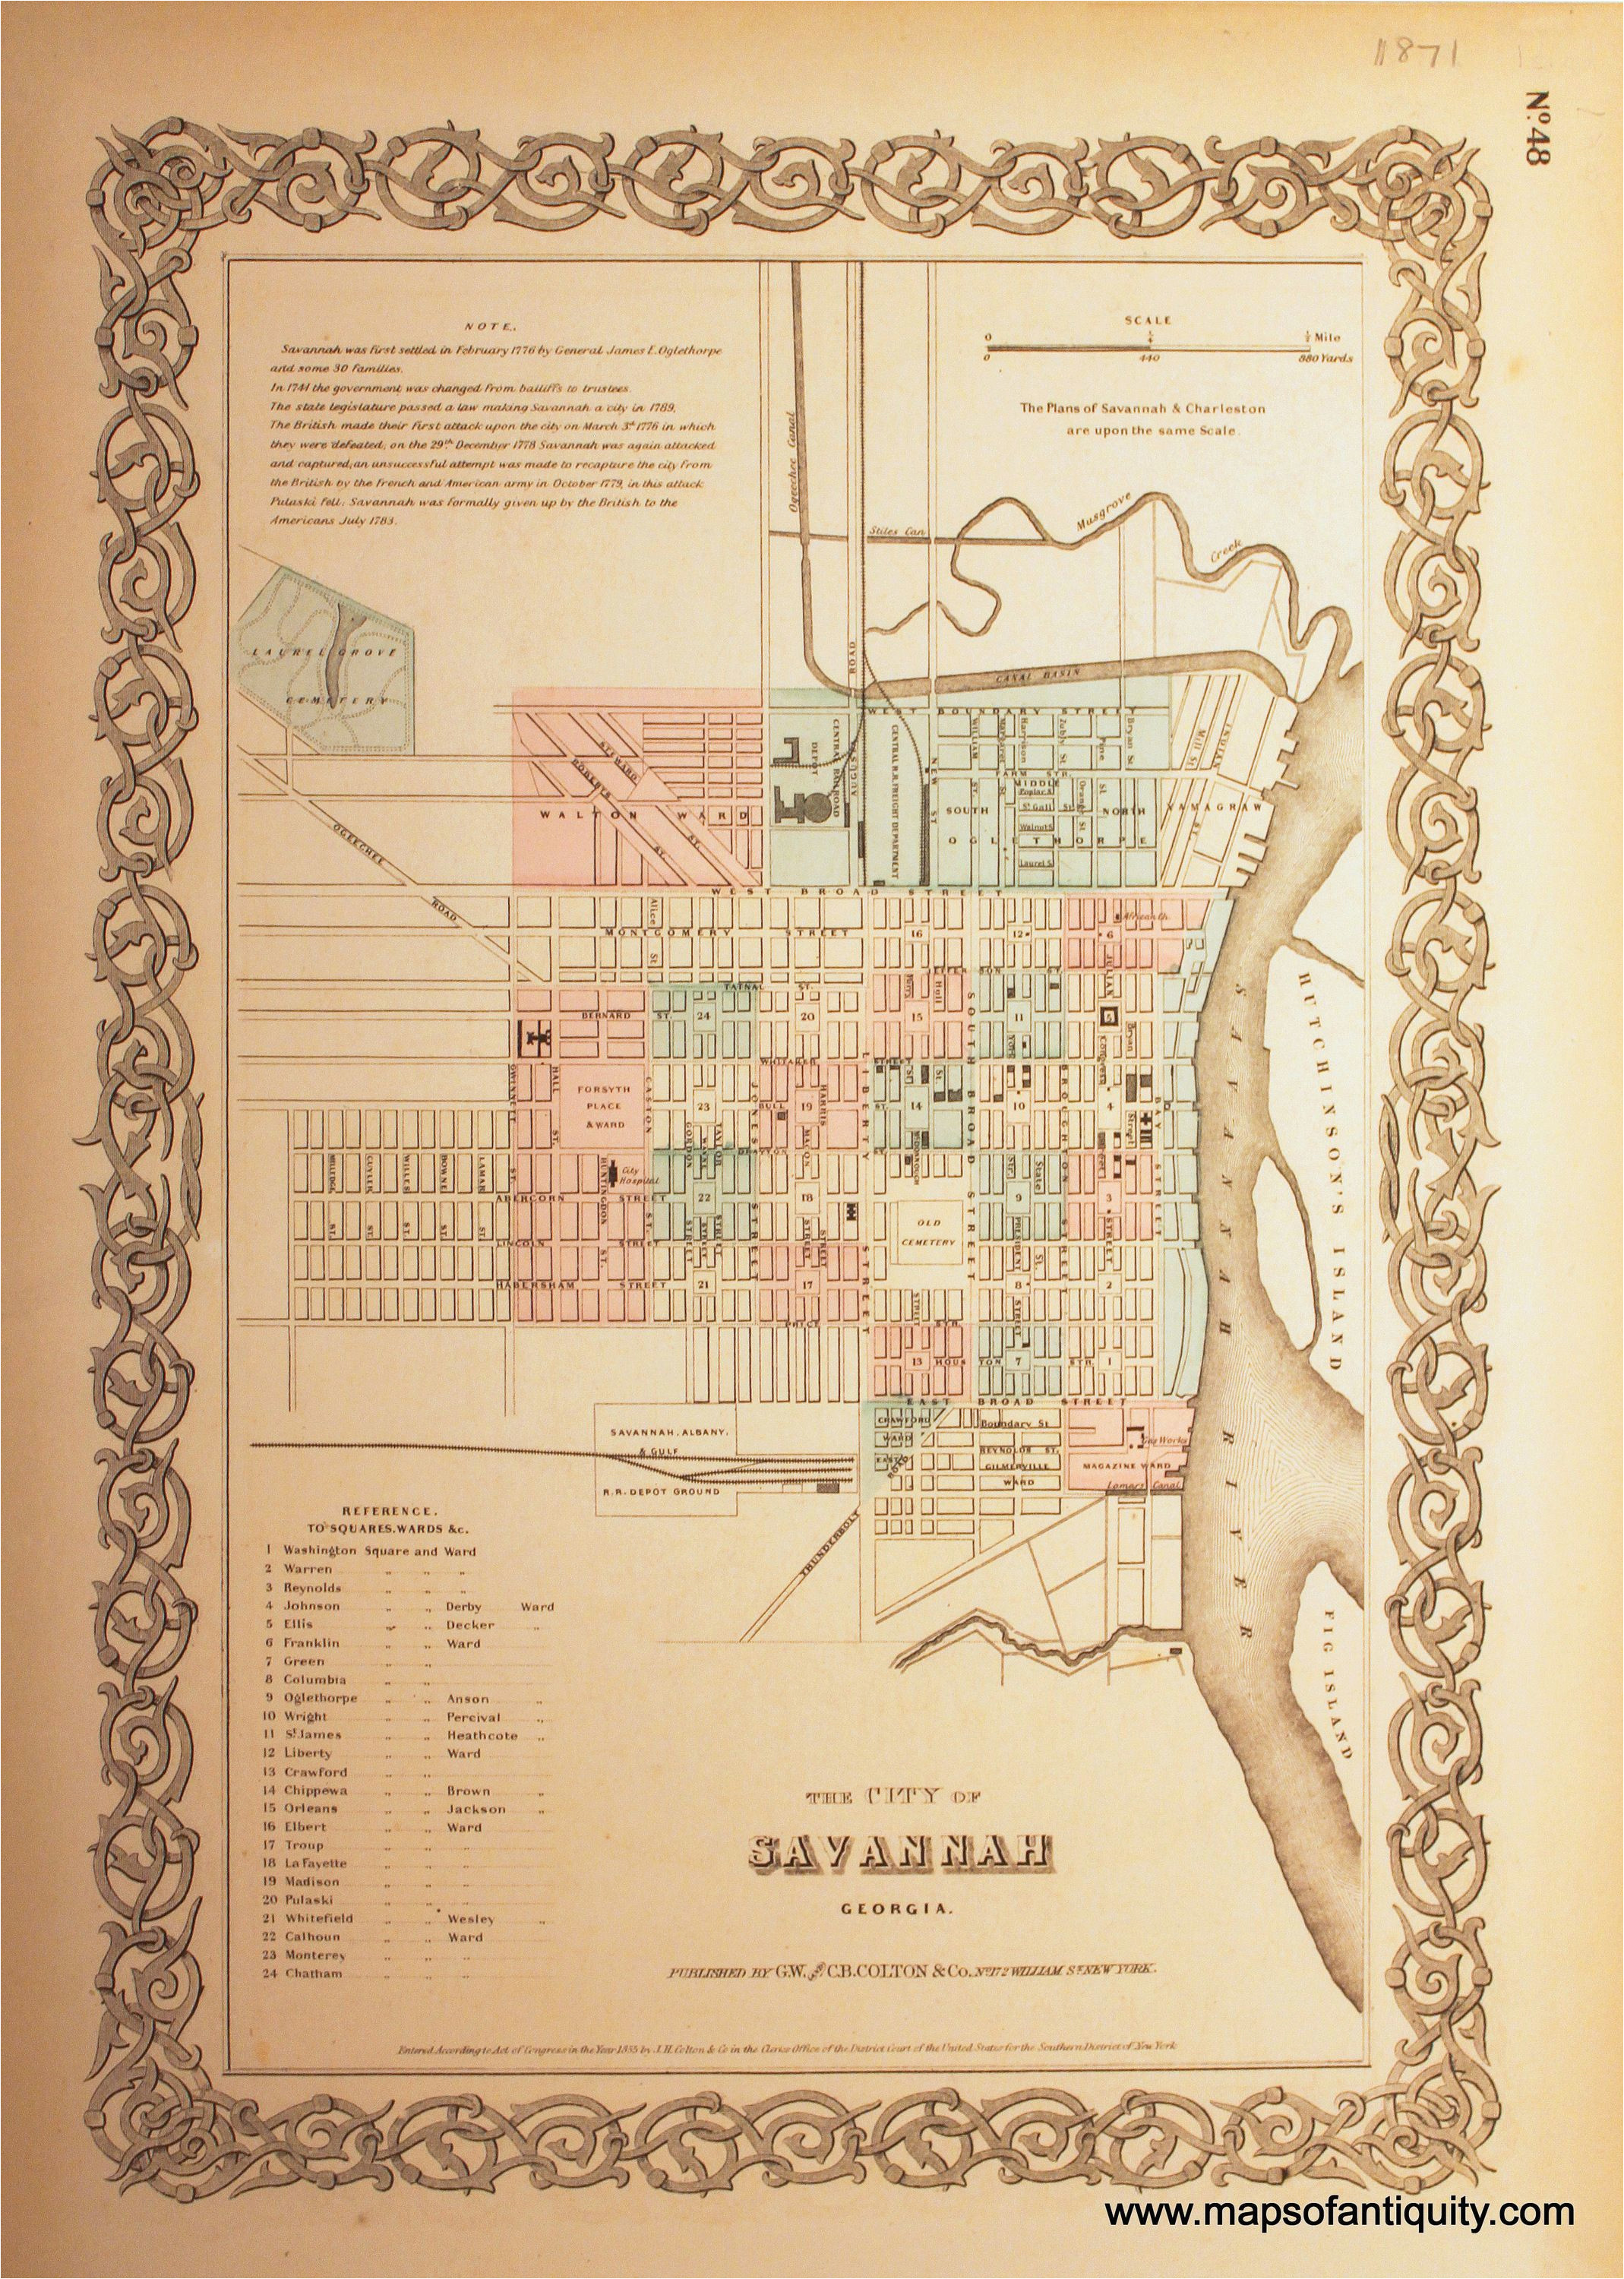 the city of savannah georgia reproduction antique maps and